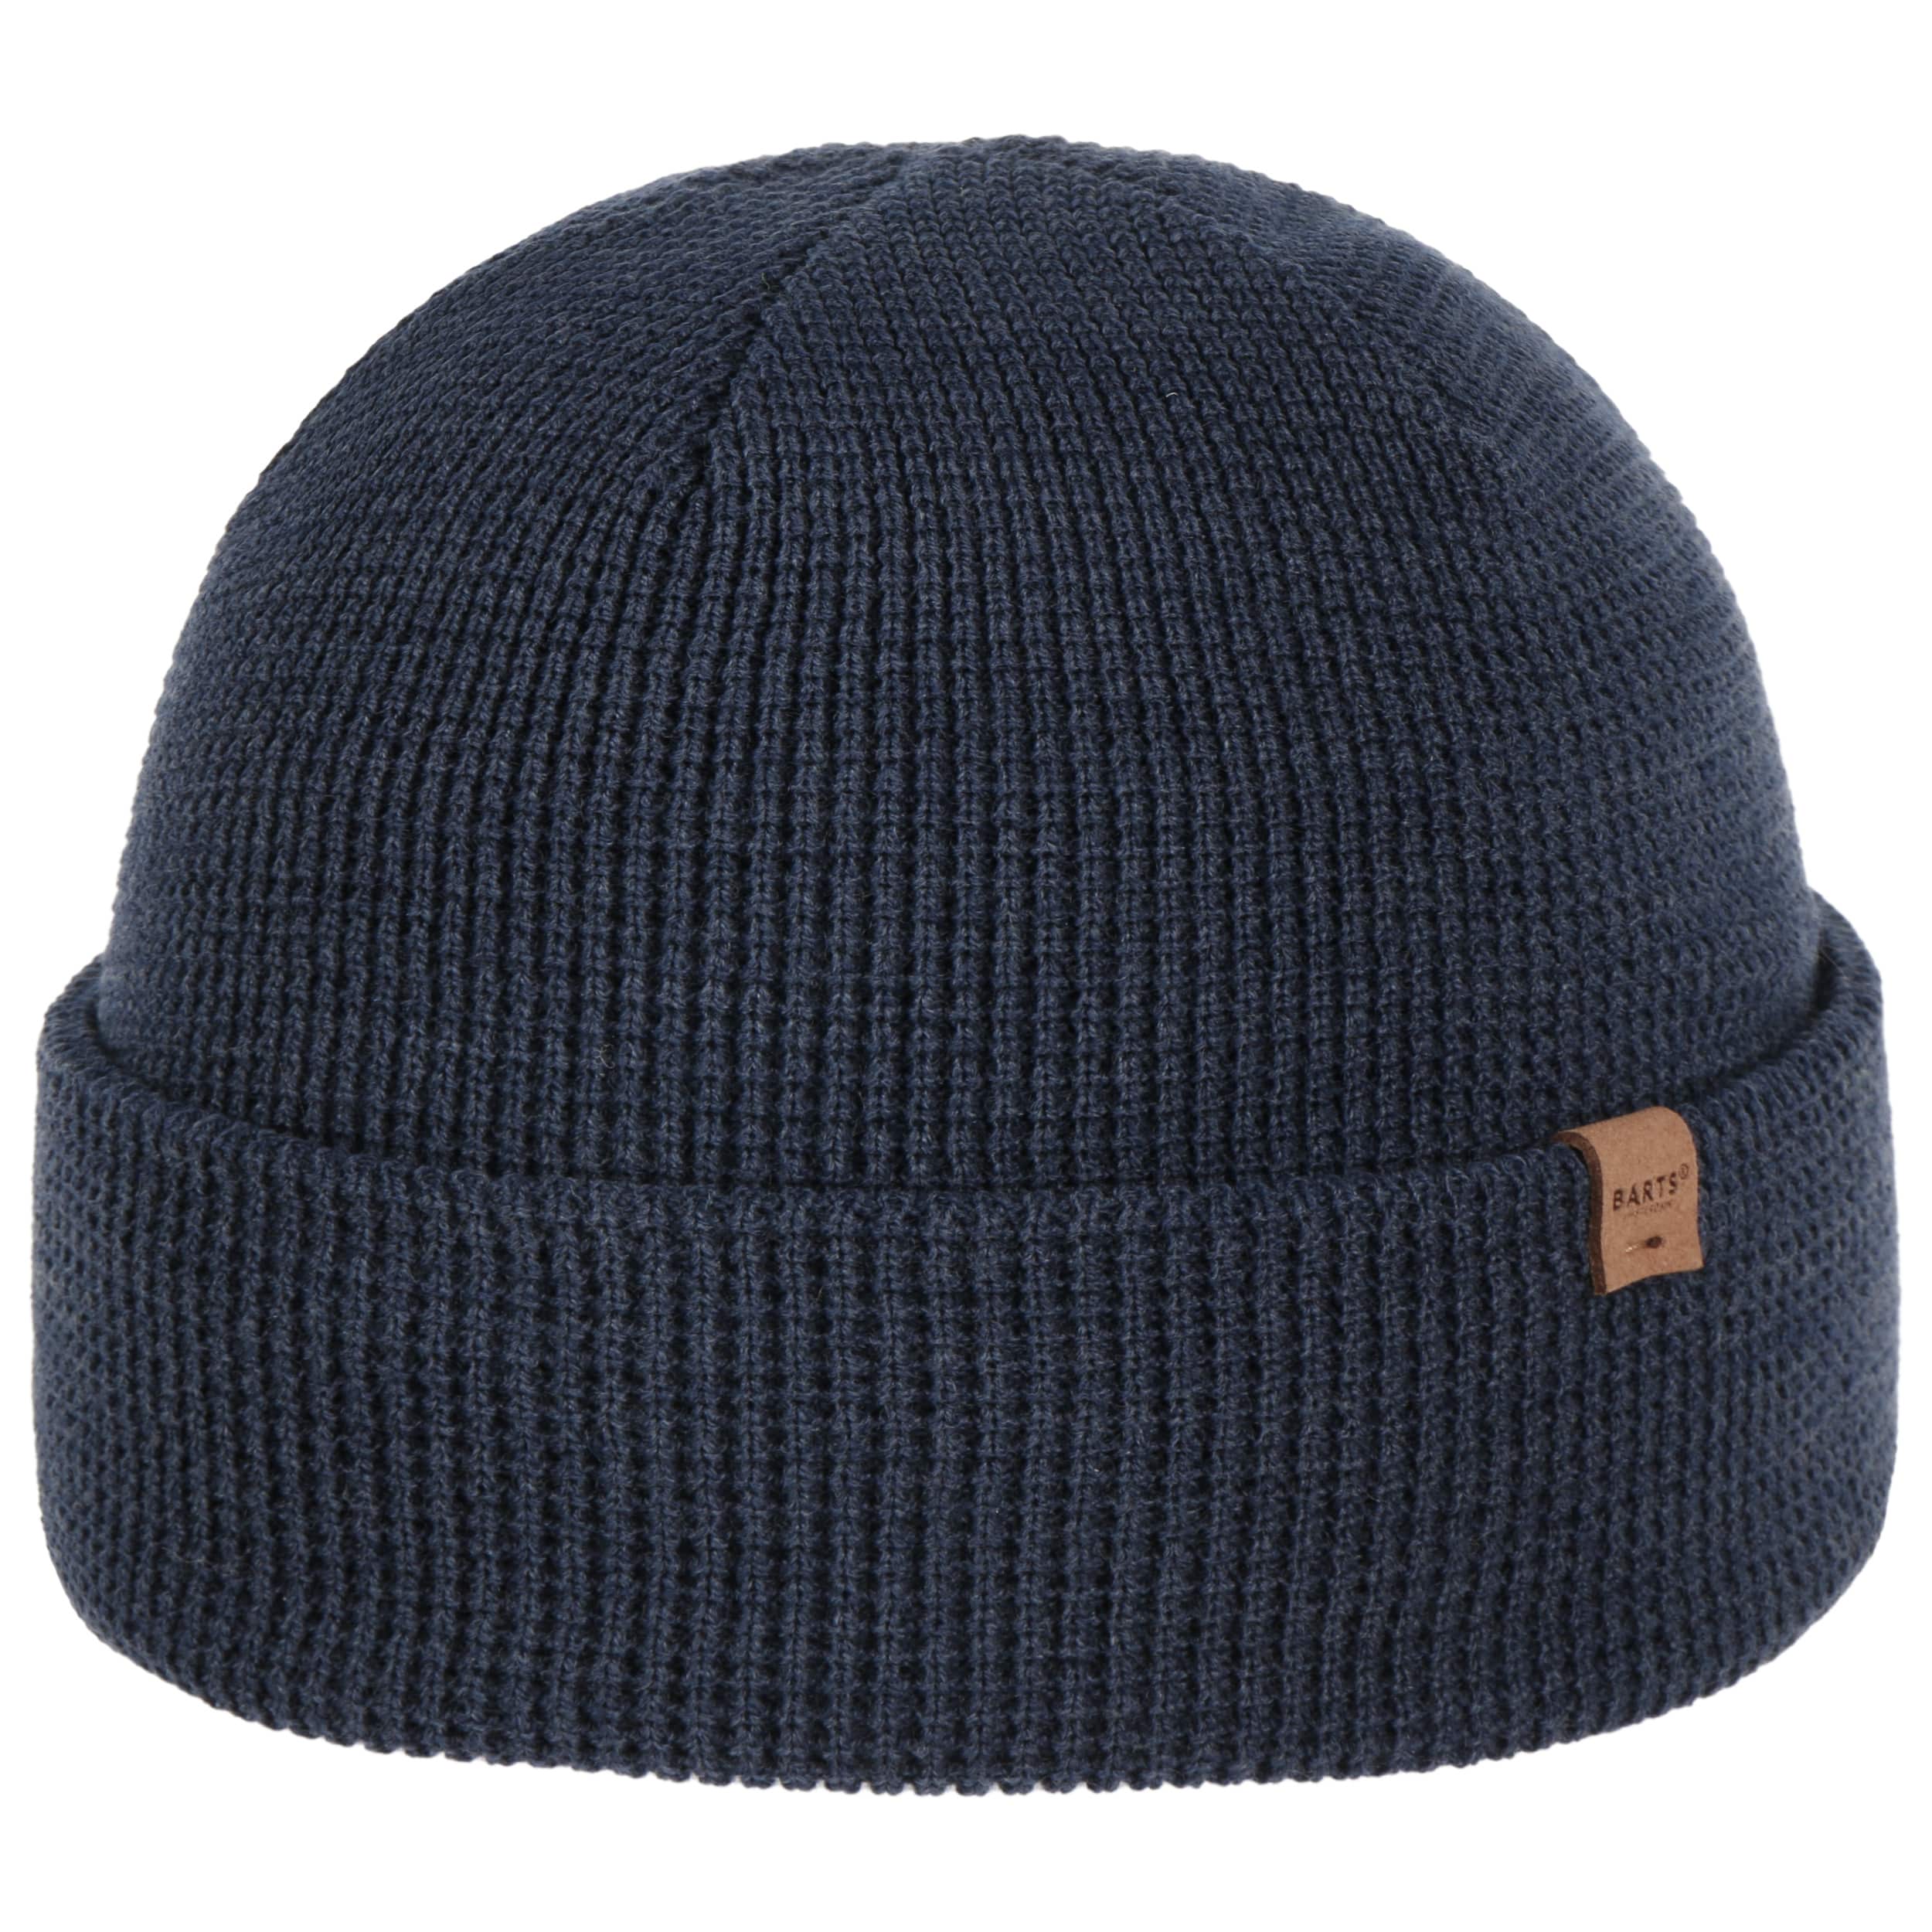 Hat Barts 26,95 - by Beanie Coler €